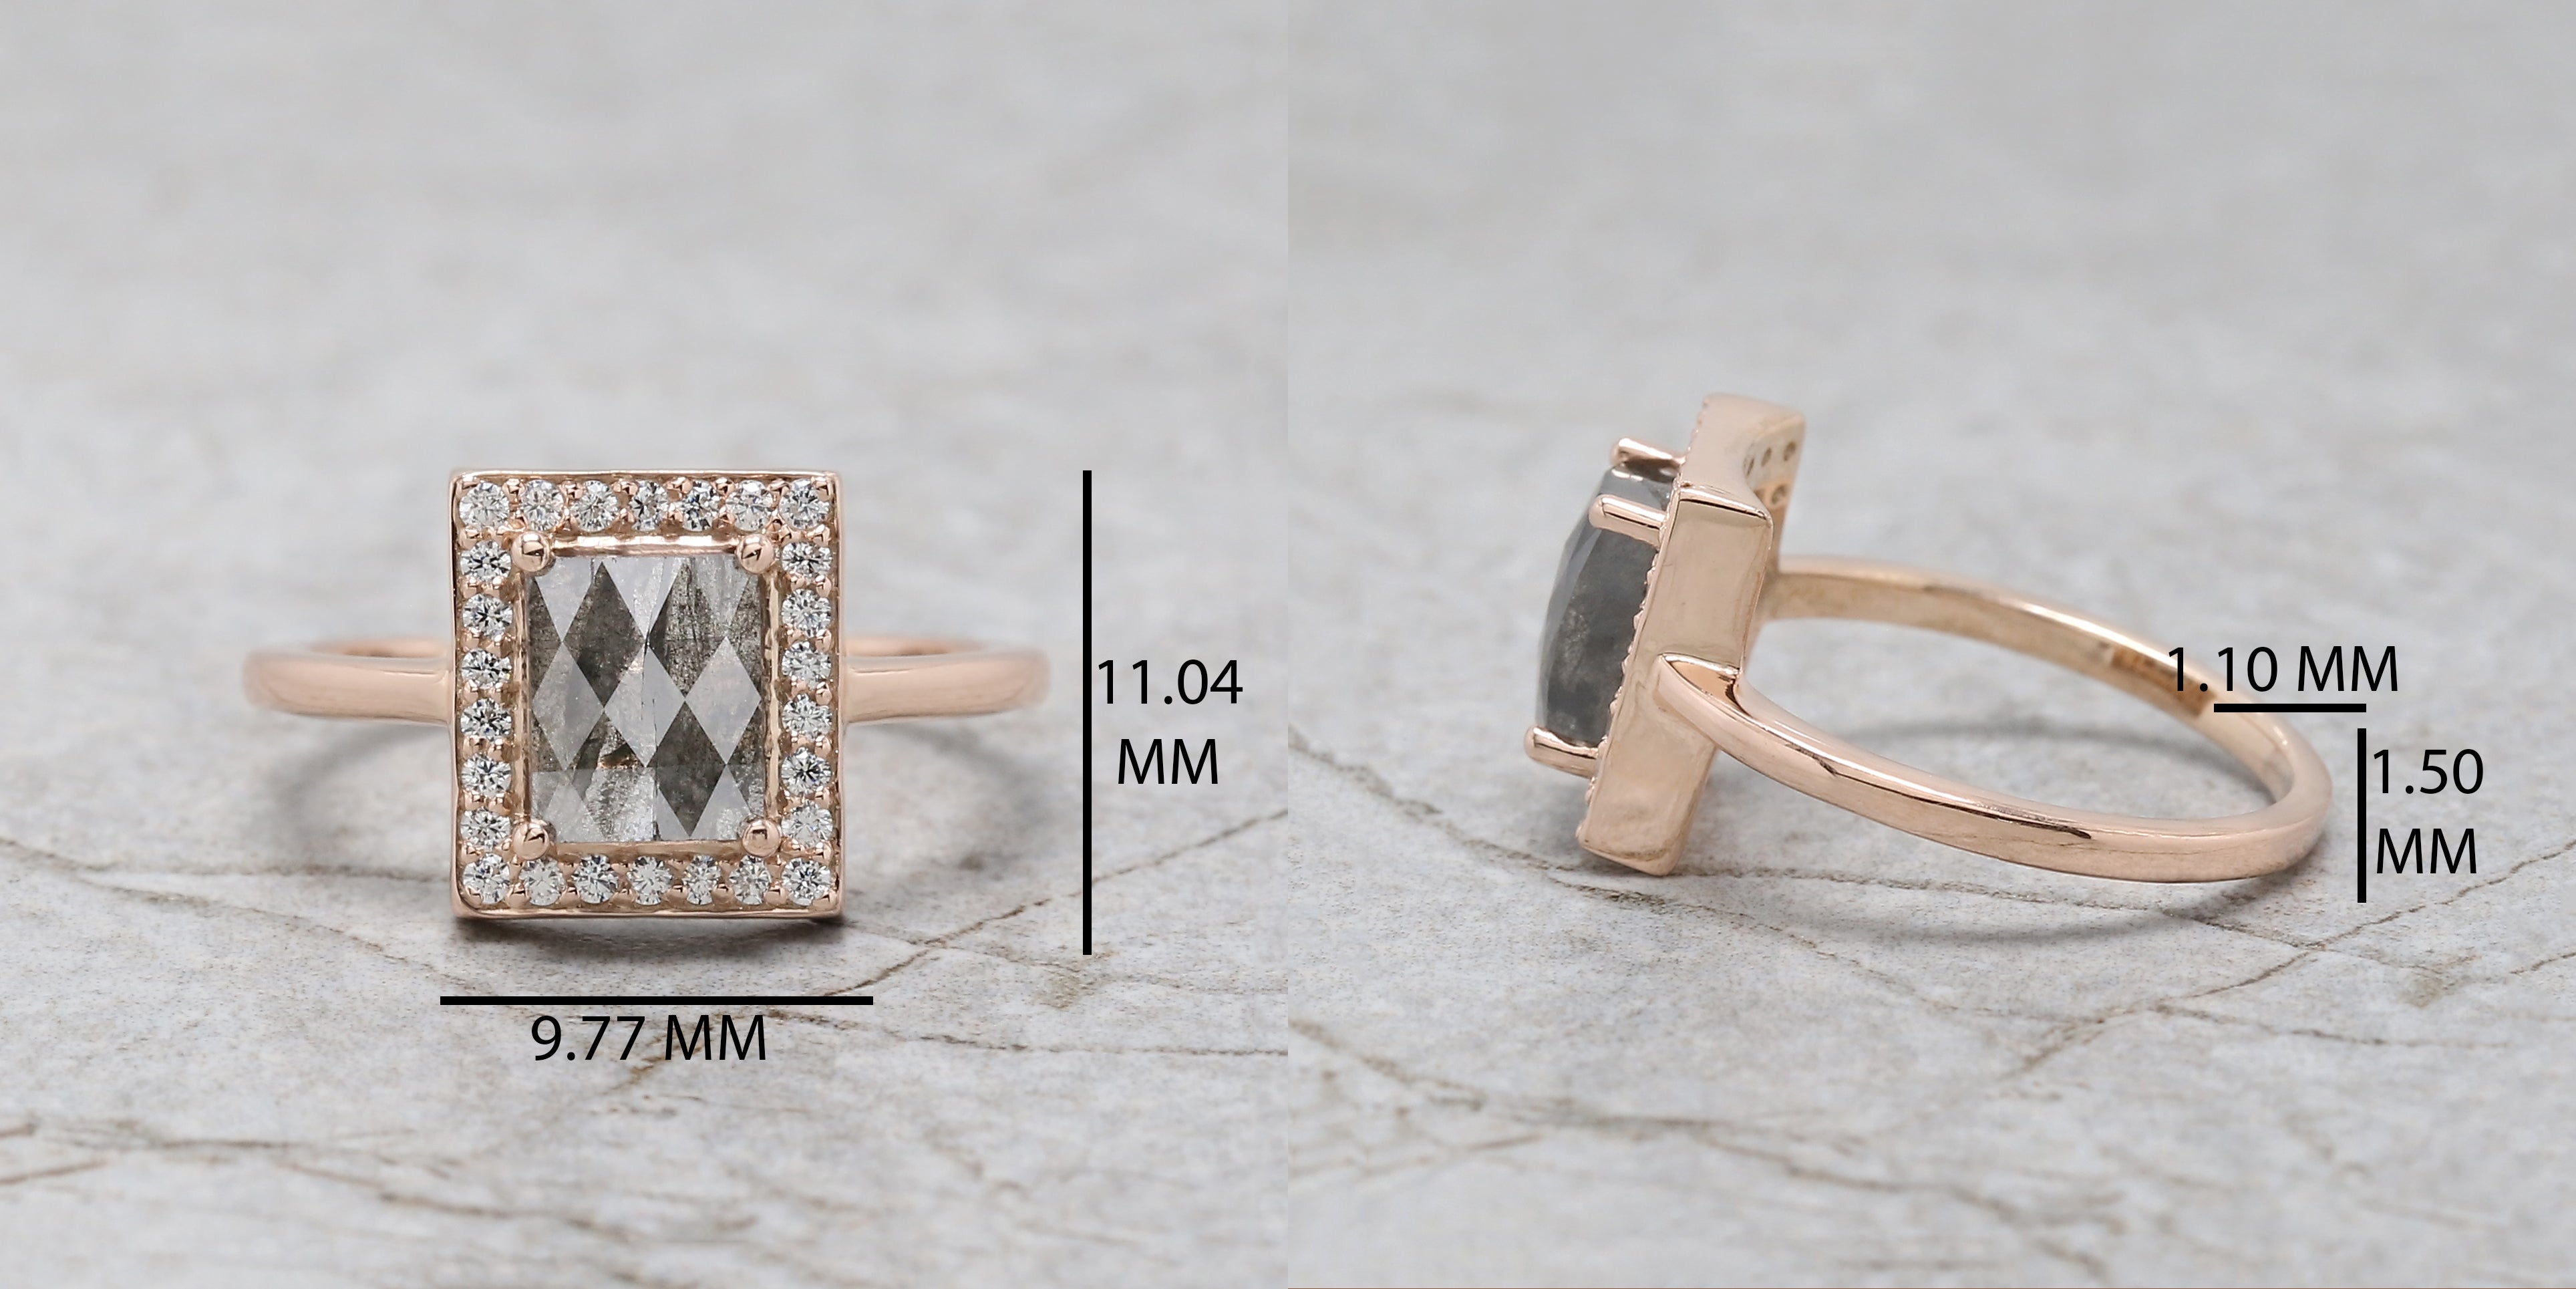 Square Cut Salt And Pepper Diamond Ring 1.50 Ct 6.85 MM Square Diamond Ring 14K Solid Rose Gold Silver Engagement Ring Gift For Her QL1615